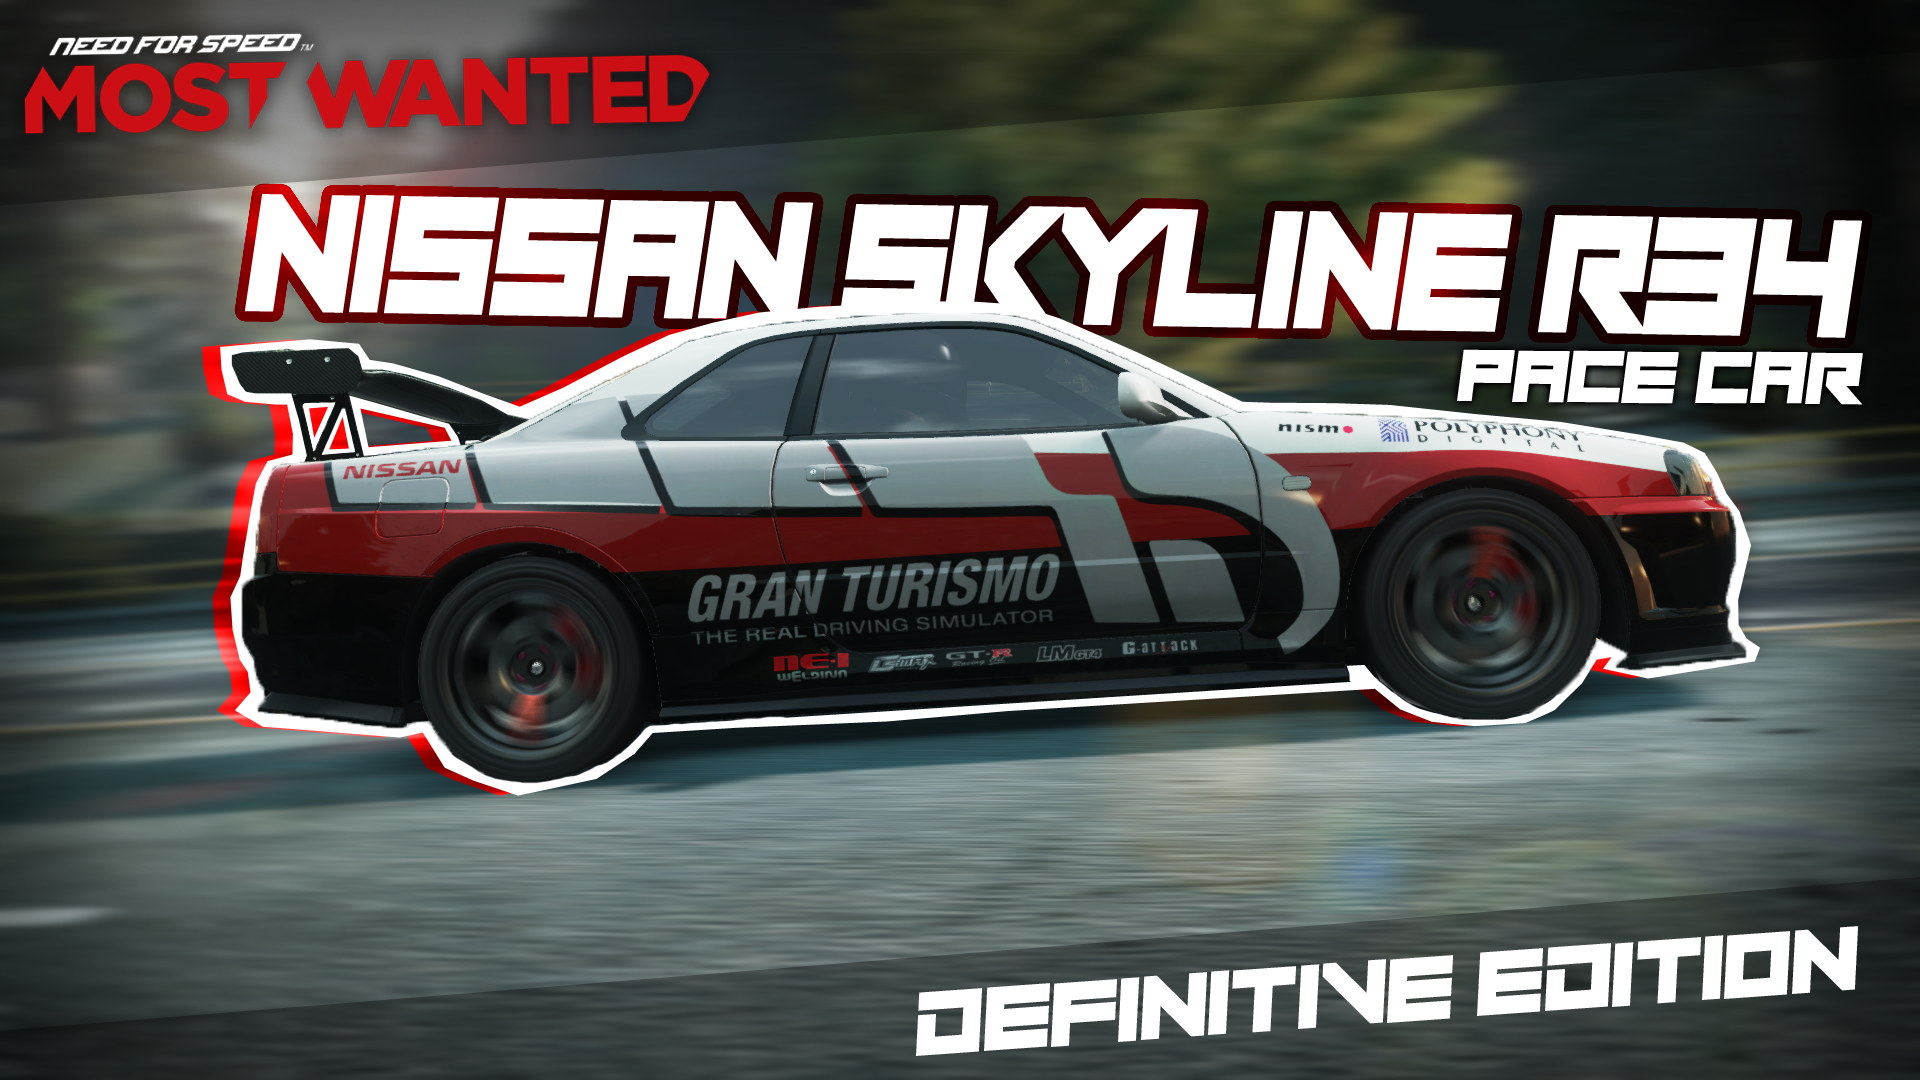 Need For Speed Most Wanted 2012 Nissan R34 Pace Car Definitive Edition!